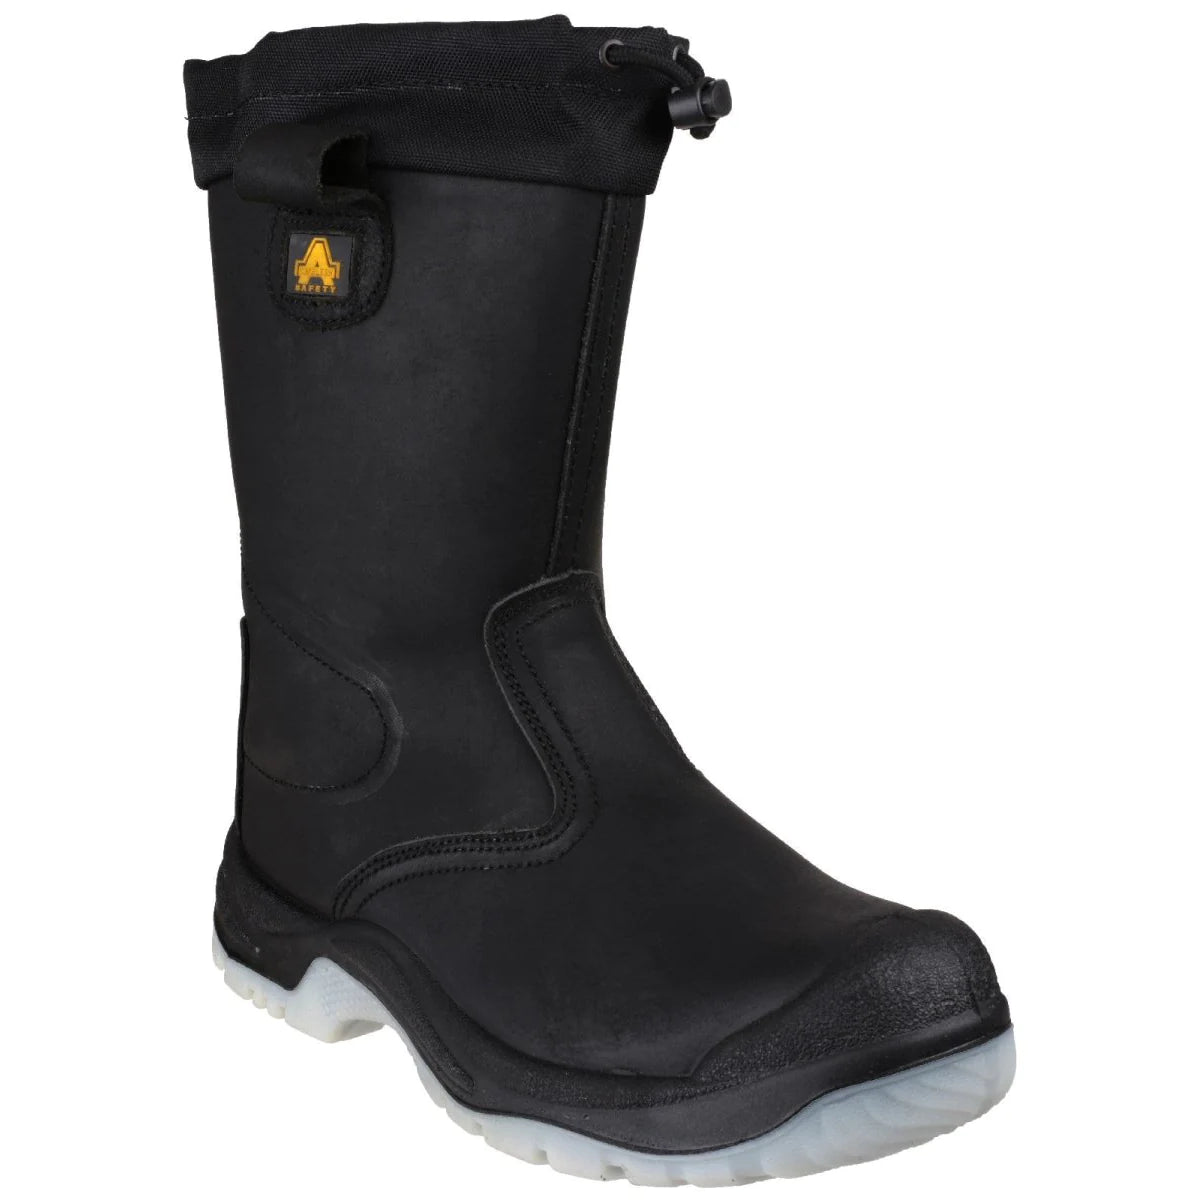 Amblers FS209 S3 Steel Toe & Midsole Safety Rigger Boots - Shoe Store Direct